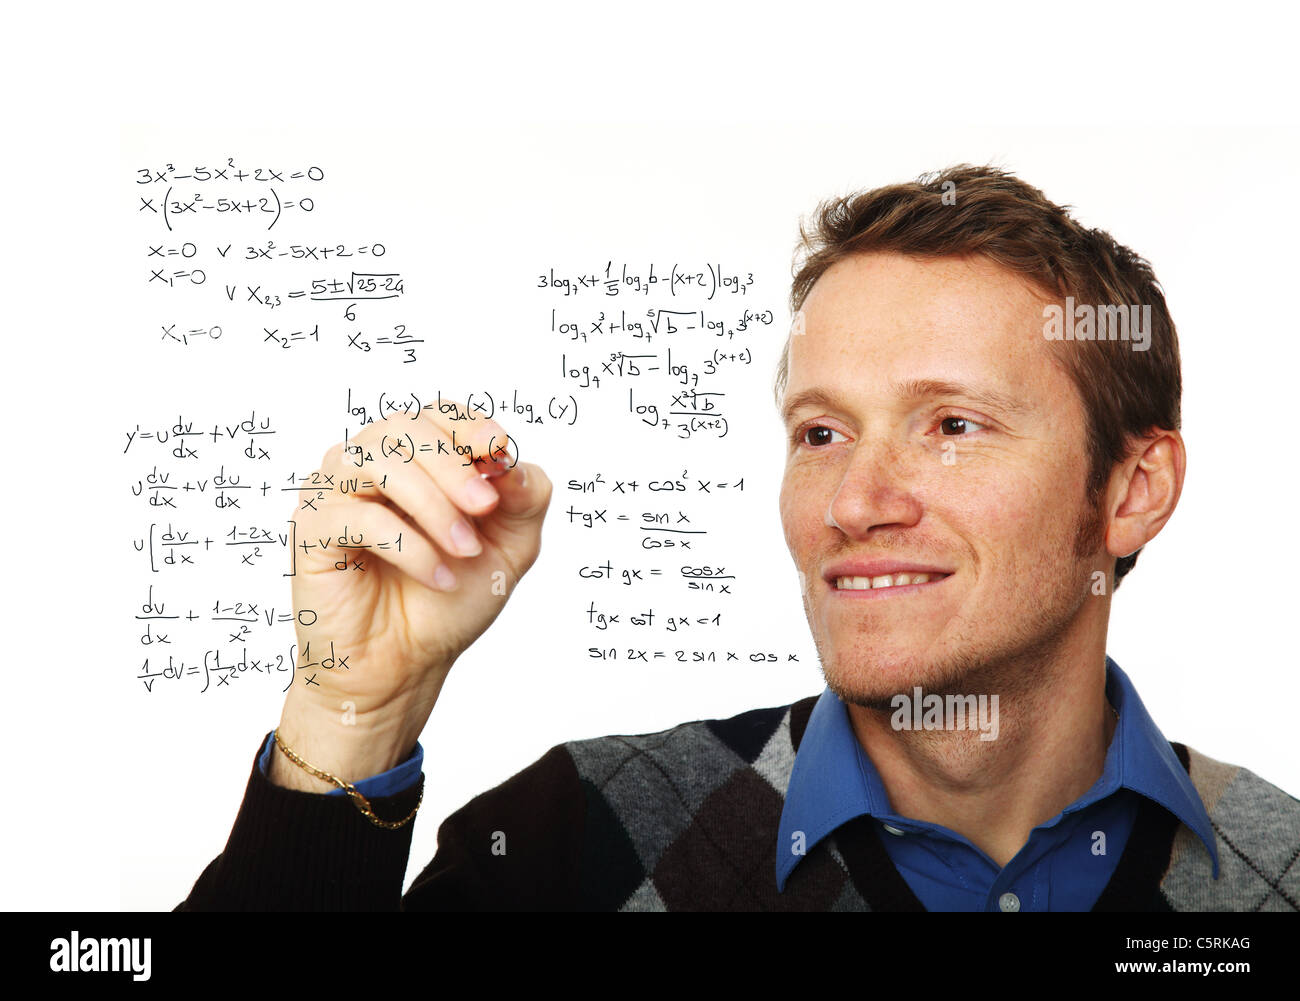 portrait of young man writing on glass board isolated on white Stock Photo